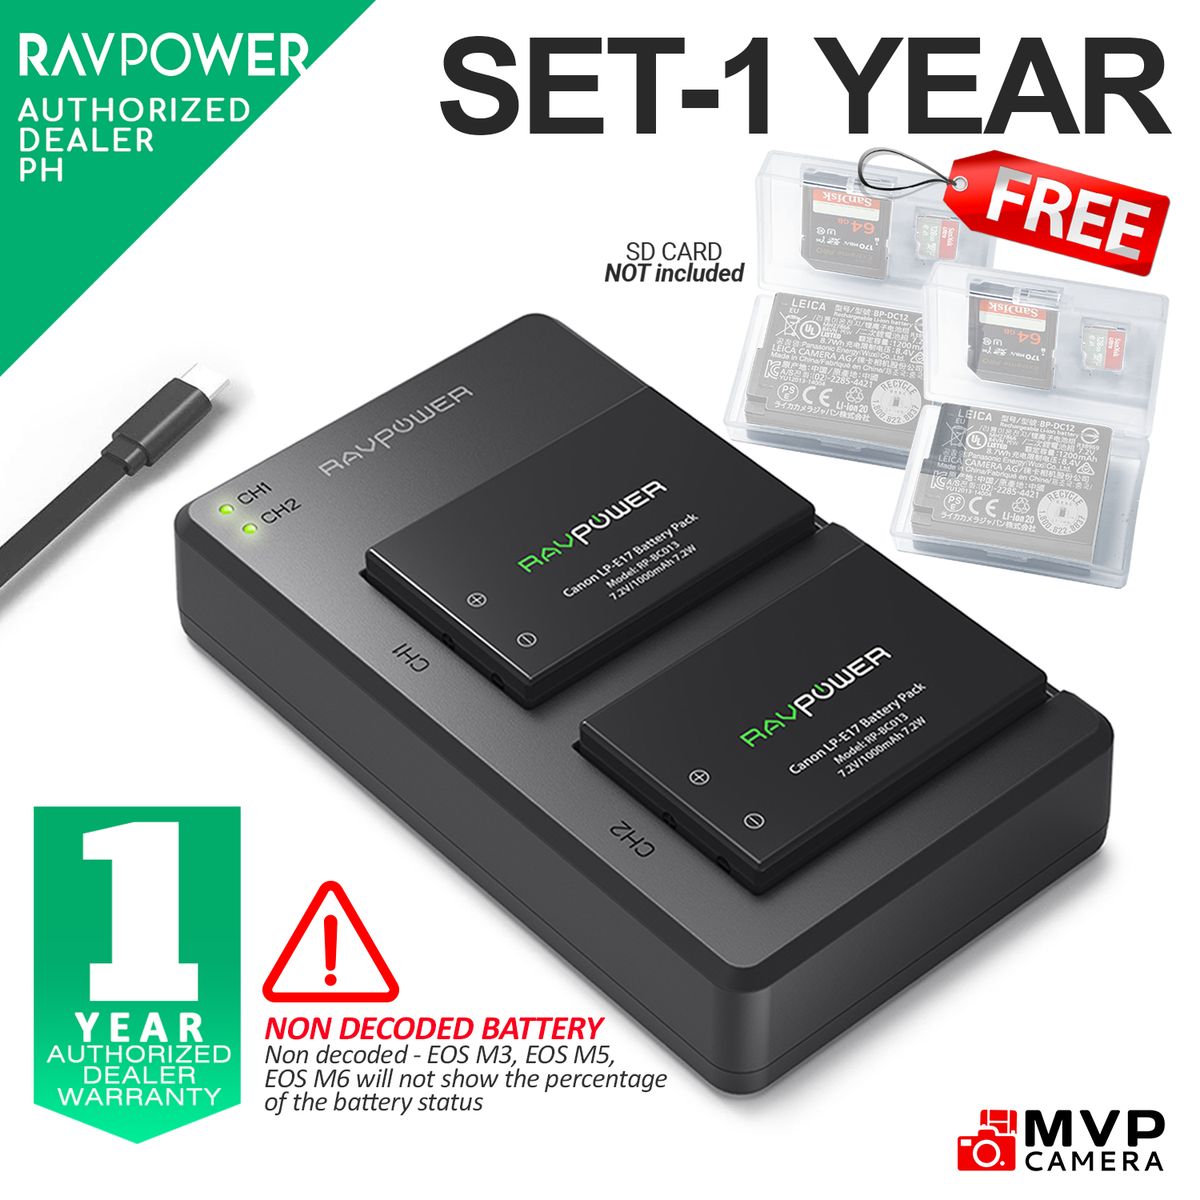 Wasabi Power LP-E17 Battery (2-Pack) and Dual USB Charger for Canon LP-E17  and Canon EOS R10, EOS RP, EOS M6 Mark II, M6, M5, M3, EOS Rebel T8i, T7i